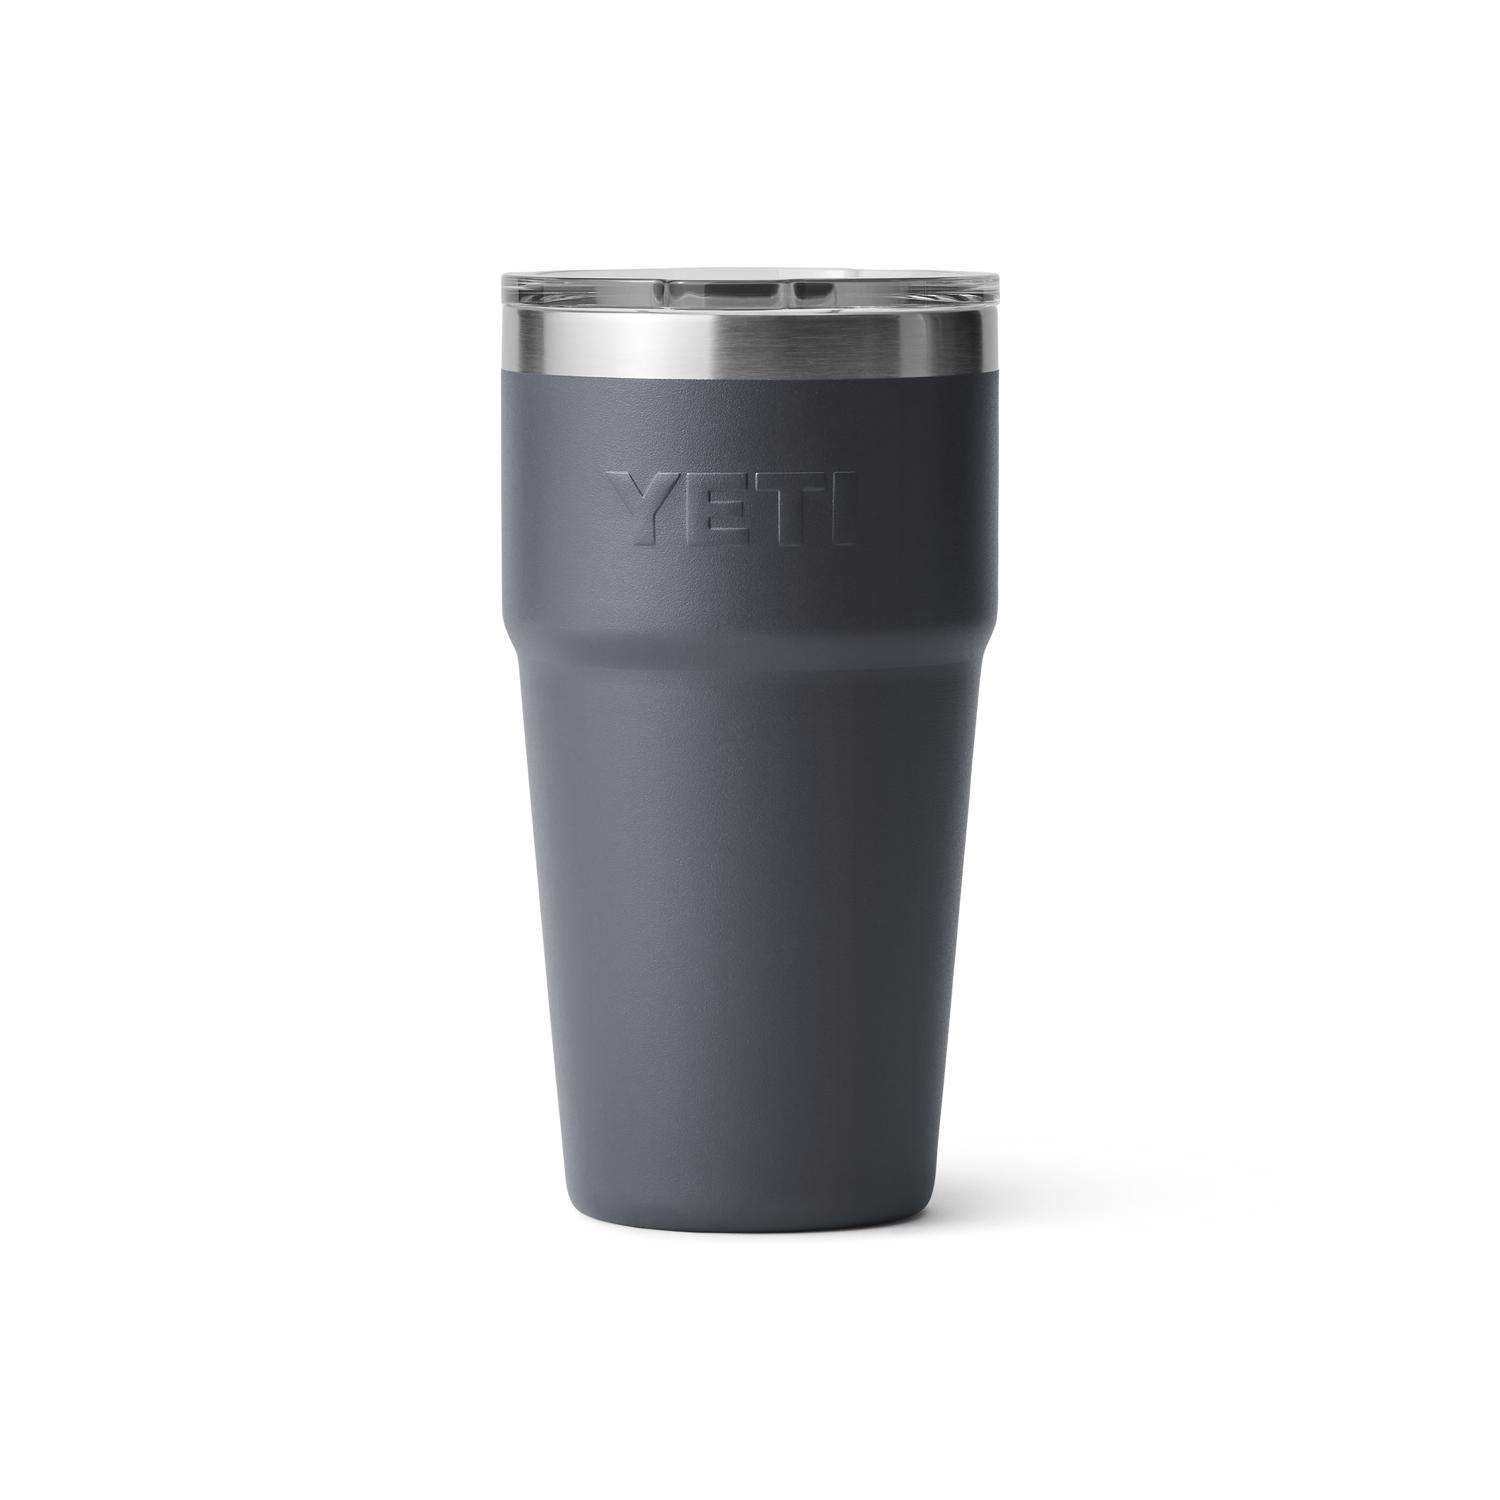 yeti reached out about an opportunity to paint 40 tumbler mugs to